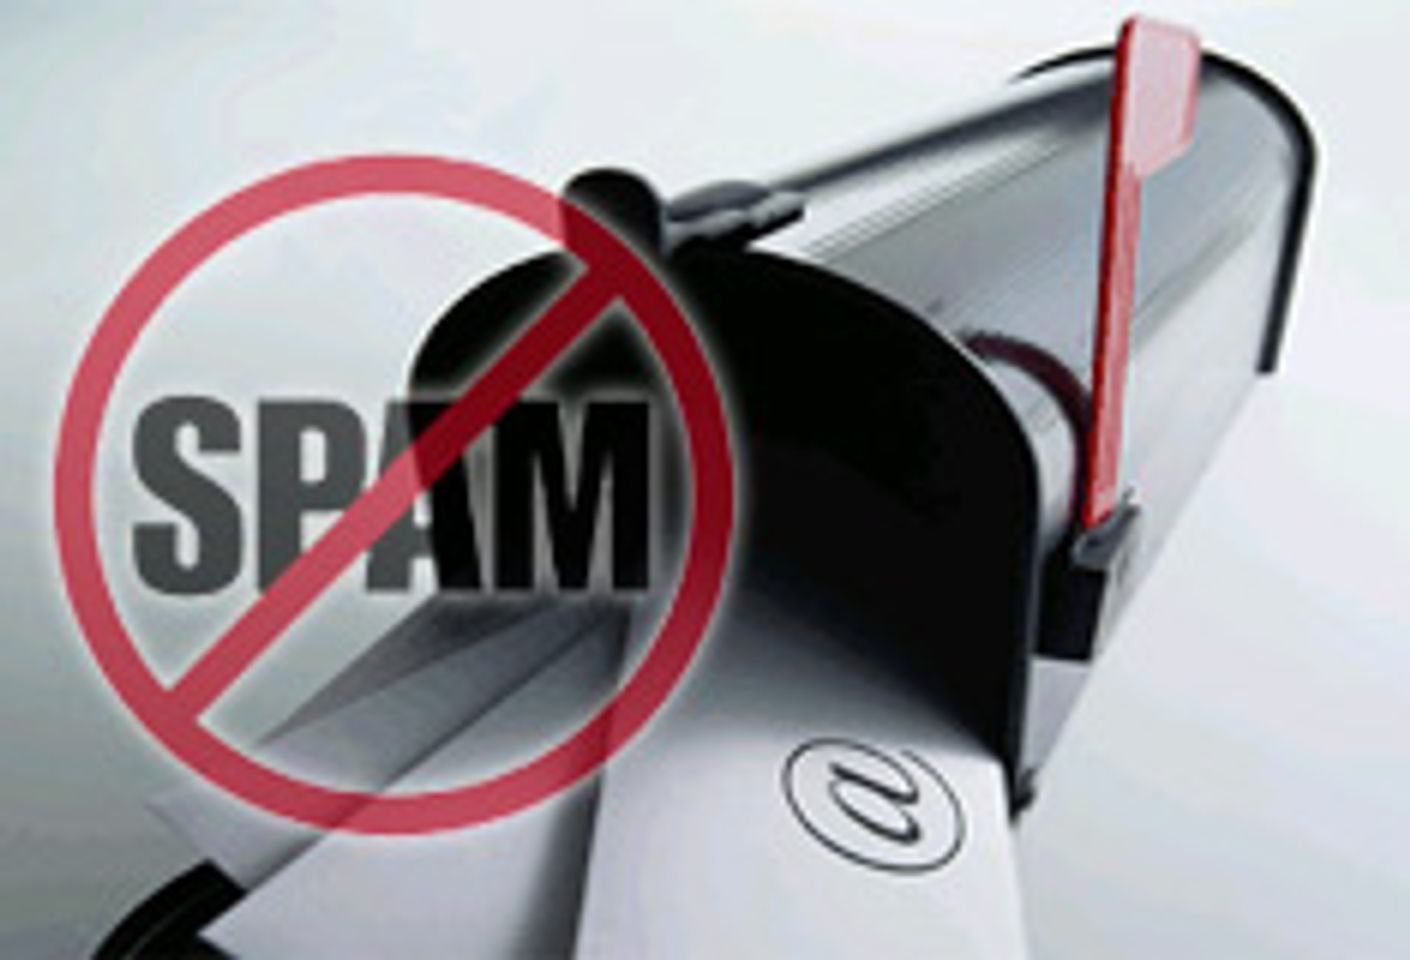 Tough Anti-Spam Law Takes Effect in Maryland